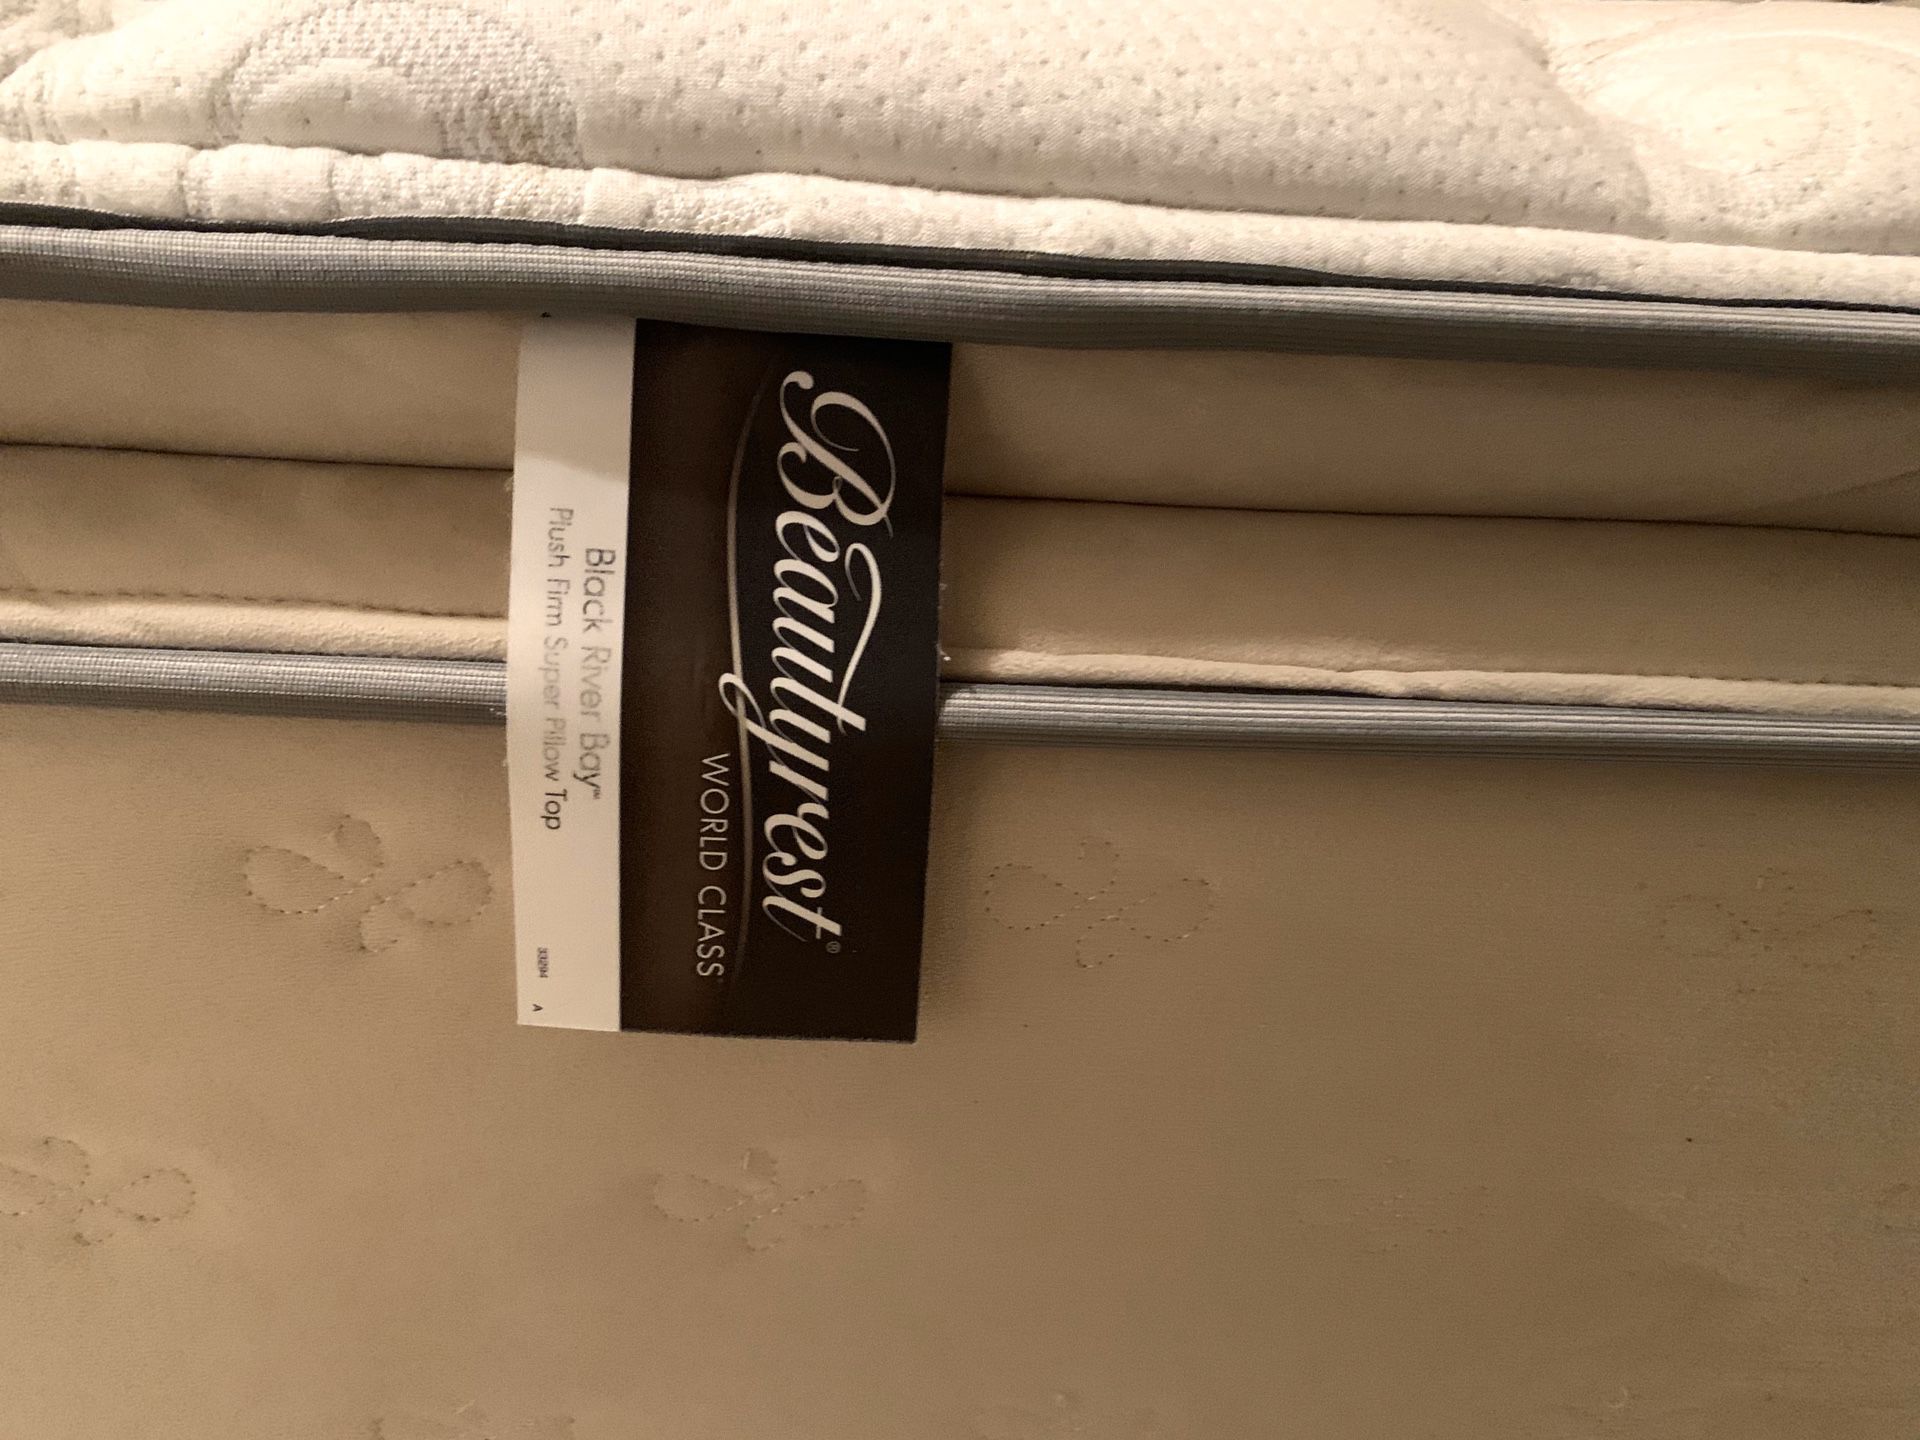 Simmons Full size mattress set with bed frame - Can Deliver